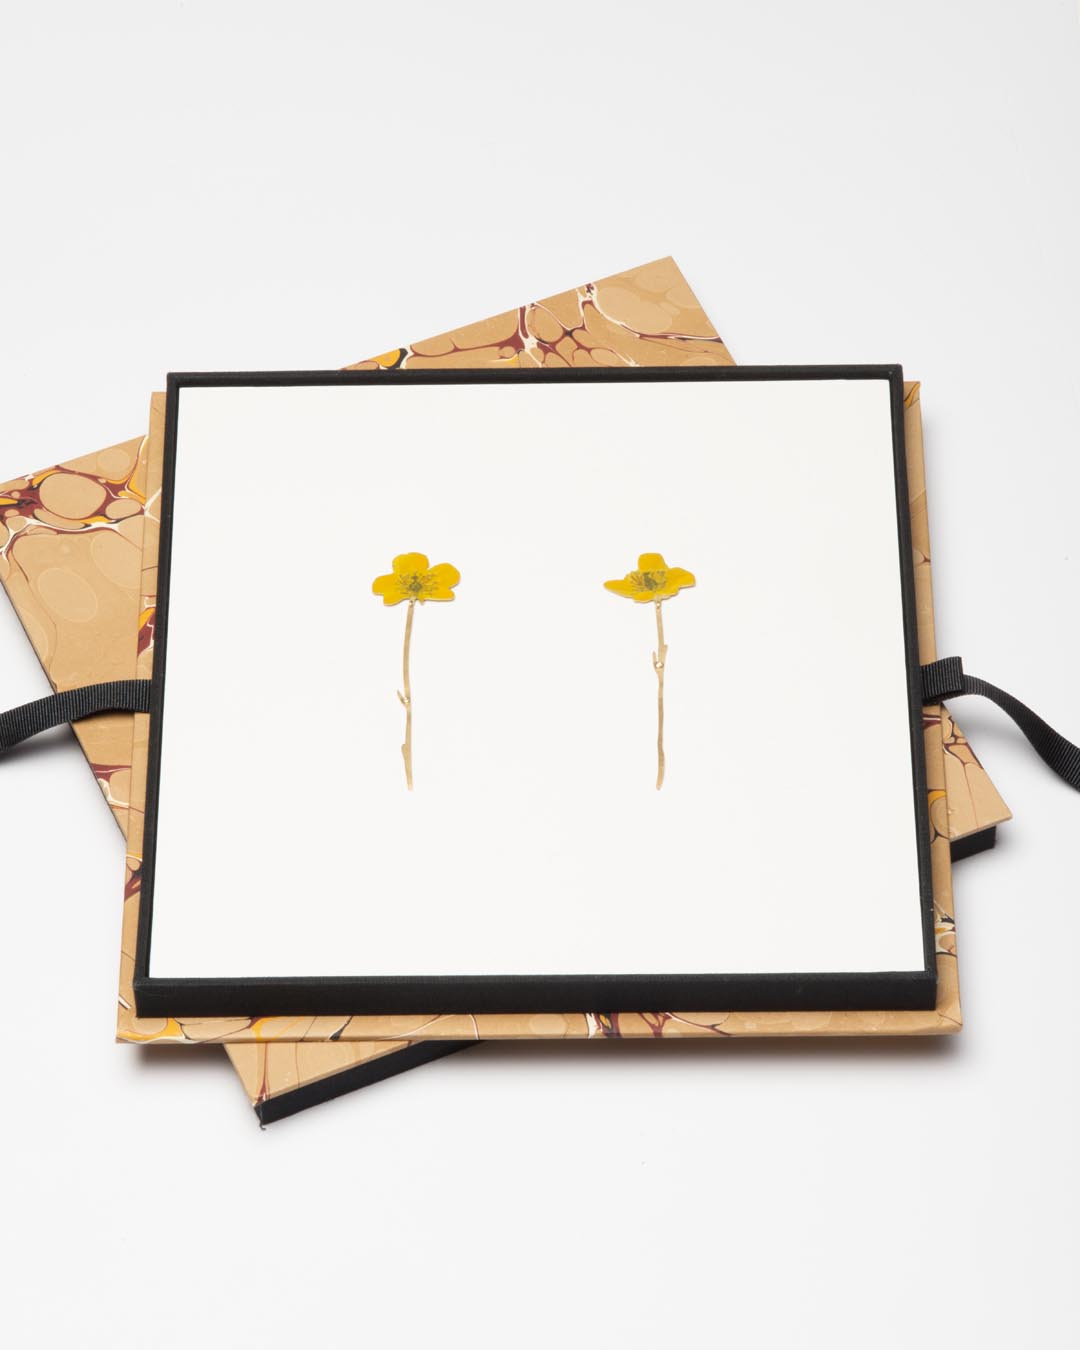 Christopher Thompson Royds, Natura Morta: buttercup, 2019, drop earrings; 18ct gold, hand-painted, diamonds, 70 x 20 mm, €1750 (image 1/2)